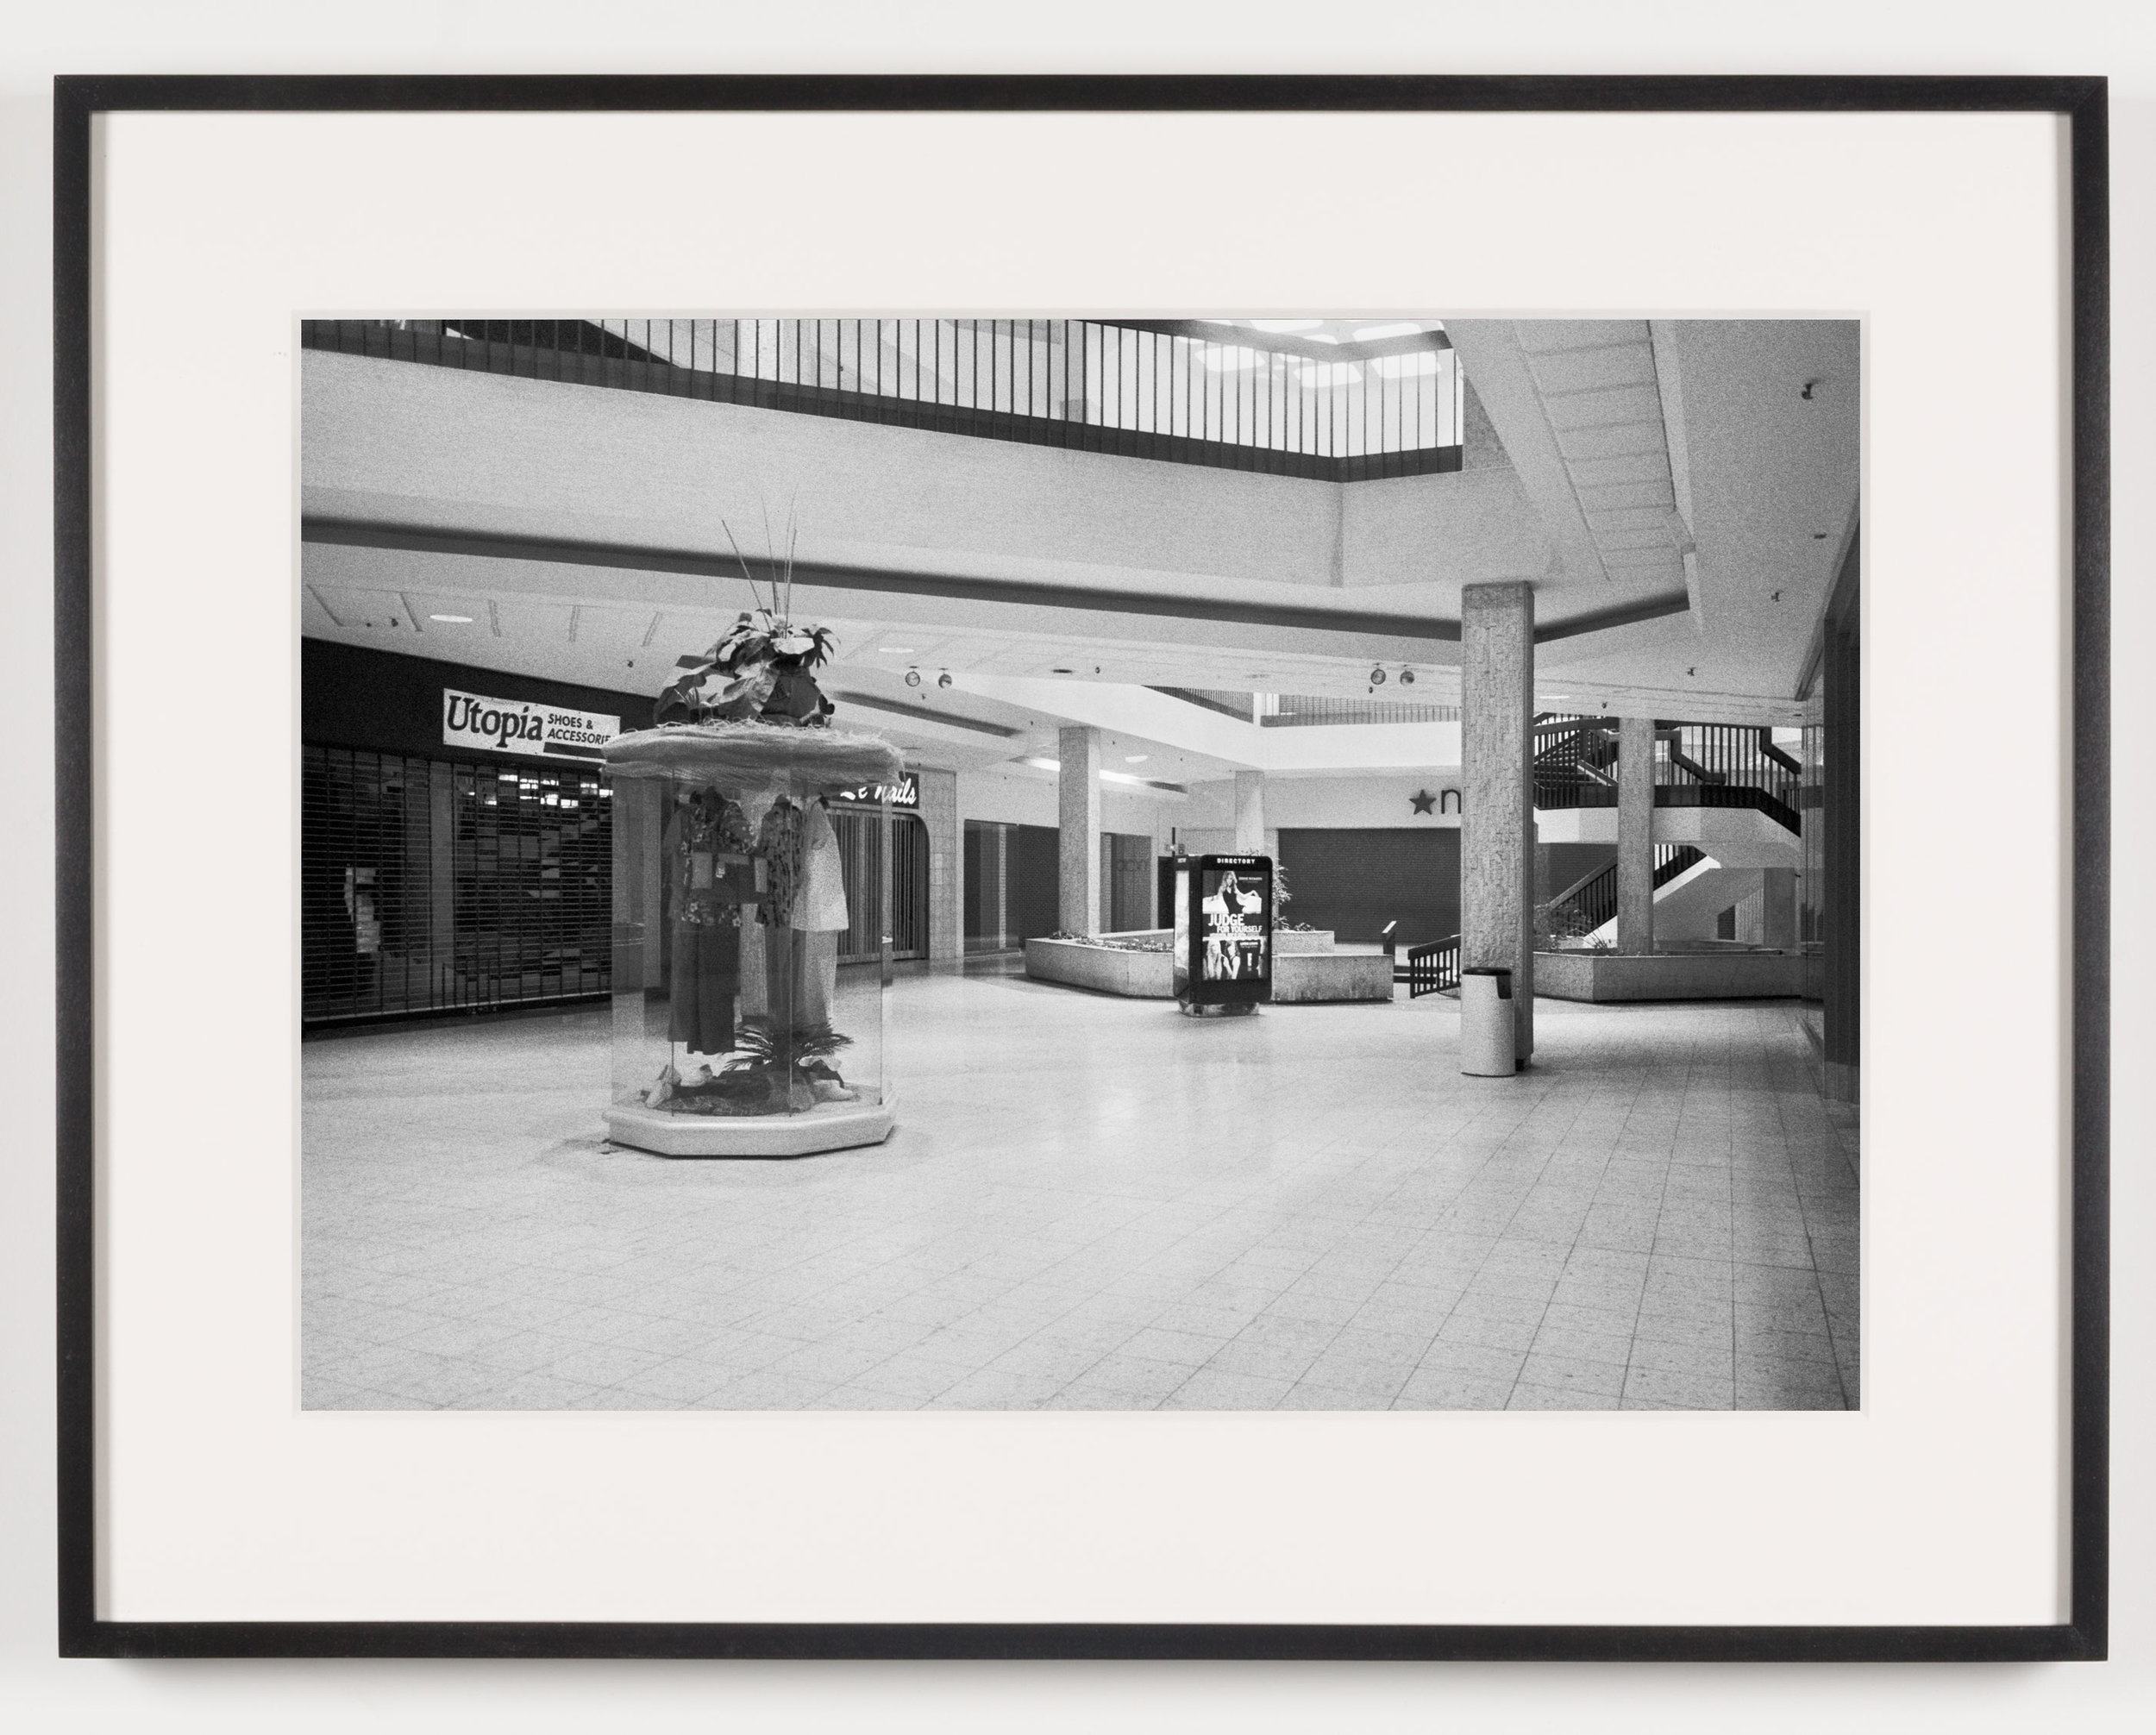   Randall Park Mall ('Utopia Shoes &amp; Accessories,' 'Le Nails,' 'Macy's'), North Randall, OH, Est. 1976, Demo. 2014   2011  Epson Ultrachrome K3 archival ink jet print on Hahnemühle Photo Rag paper  21 5/8 x 28 1/8 inches   American Passages, 2001